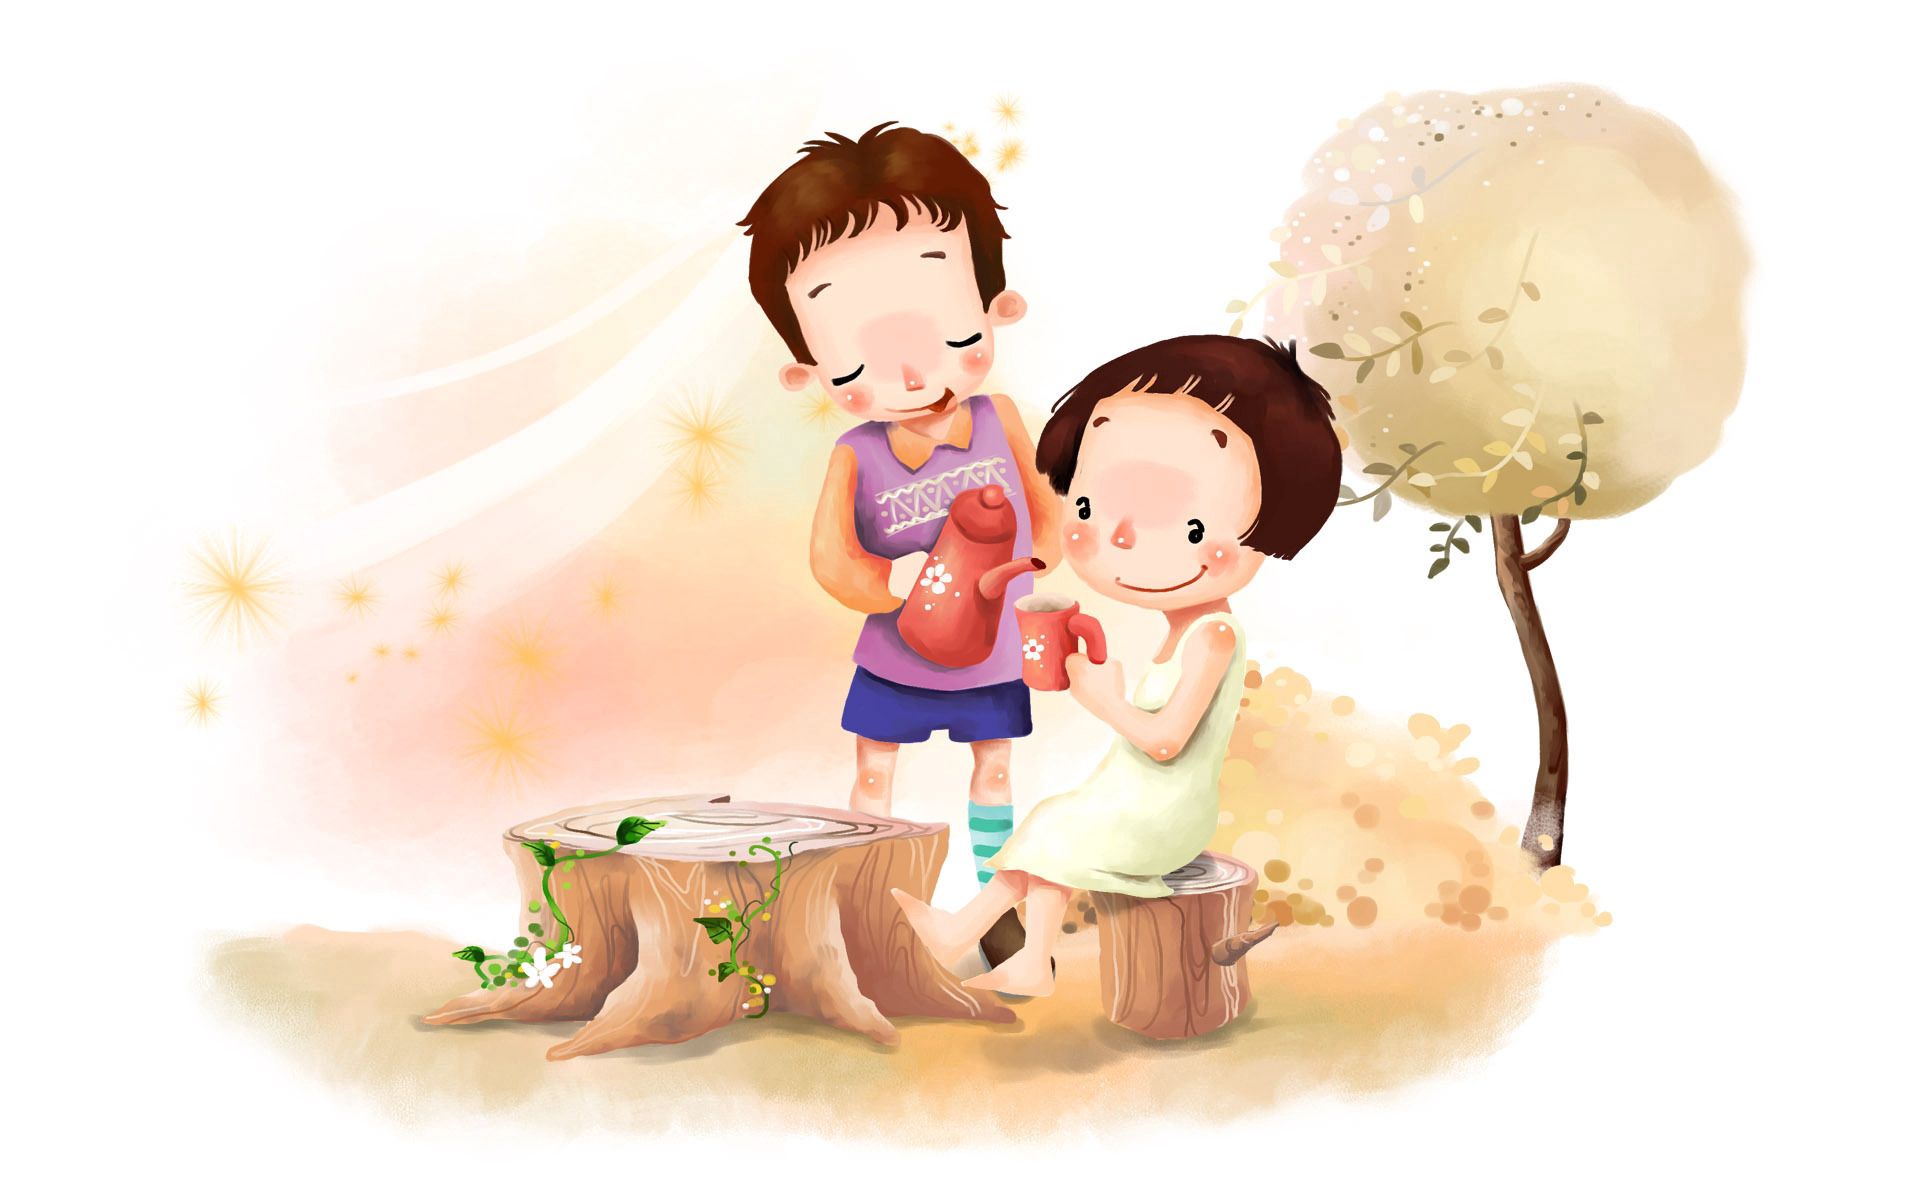 positive, polyana, girl, boy, flowers, miscellanea, miscellaneous, wood, tree, drawing, picture, foliage, glade, wind, tea party, tea drinking, childhood